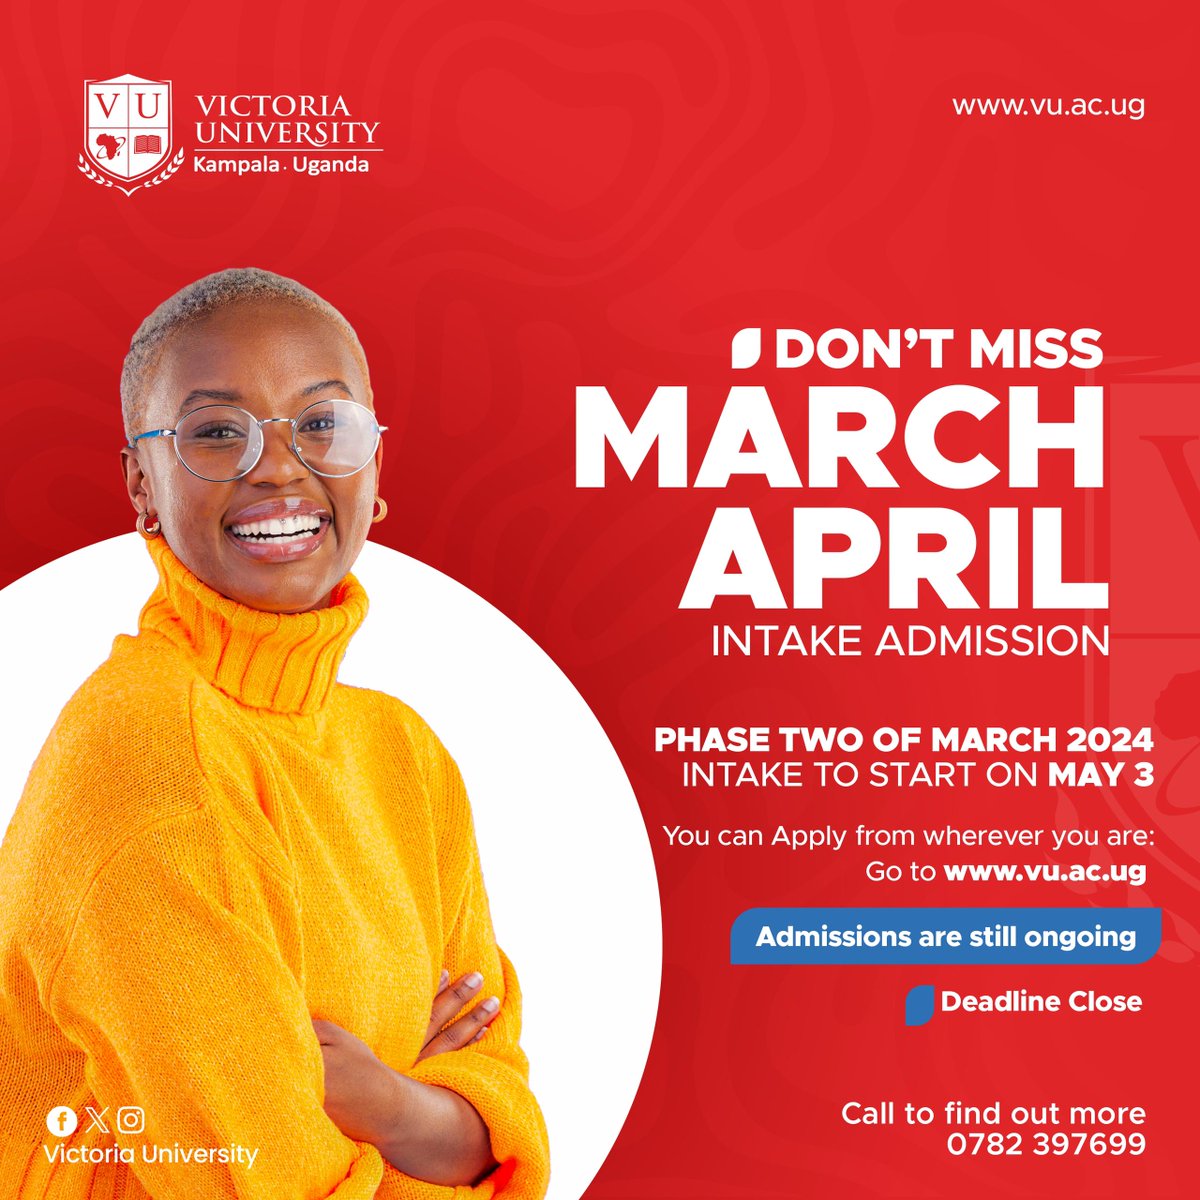 APPLY NOW We want to clarify some important details about the March/April intake, which will be closing in a few days. (Better apply now). There seems to be a misunderstanding that the March intake has already begun, and you have missed out. However, please note; You haven't…